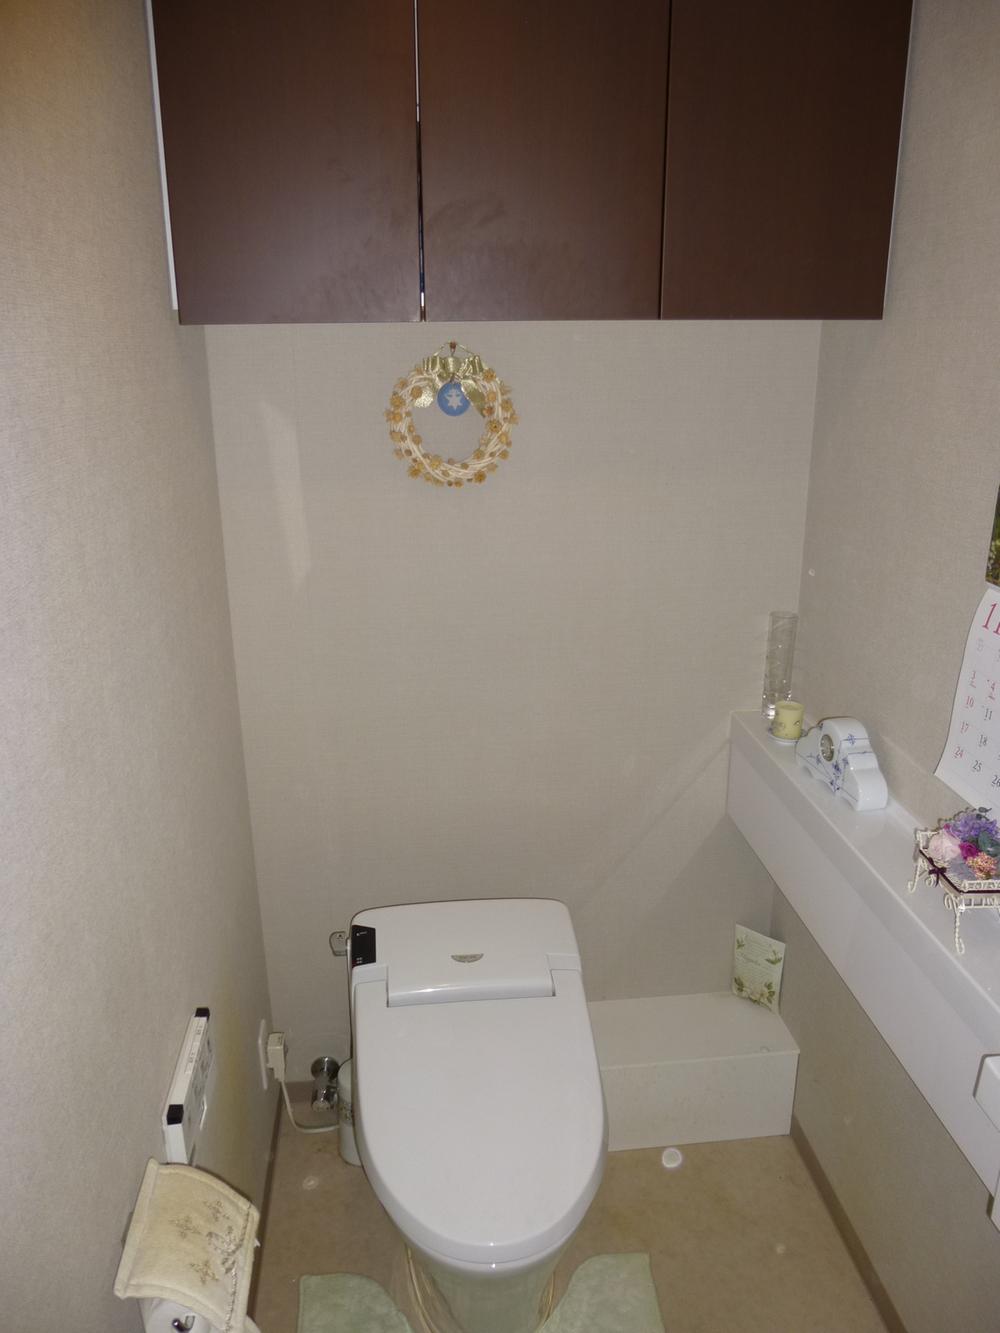 Toilet. It is refreshing space because the tankless toilet.